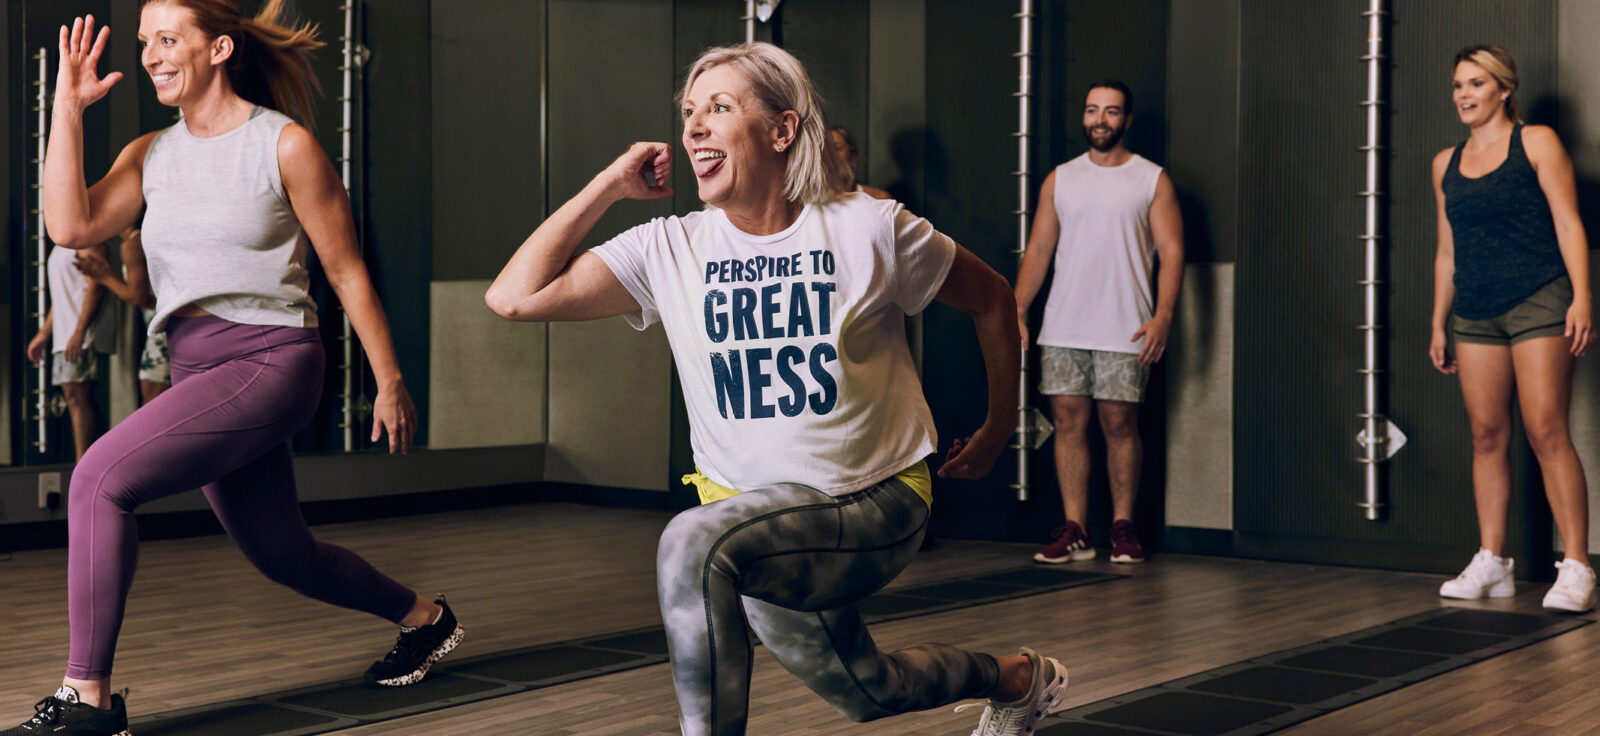 What's the Best Gym Membership With Group Classes? Crunch Fitness